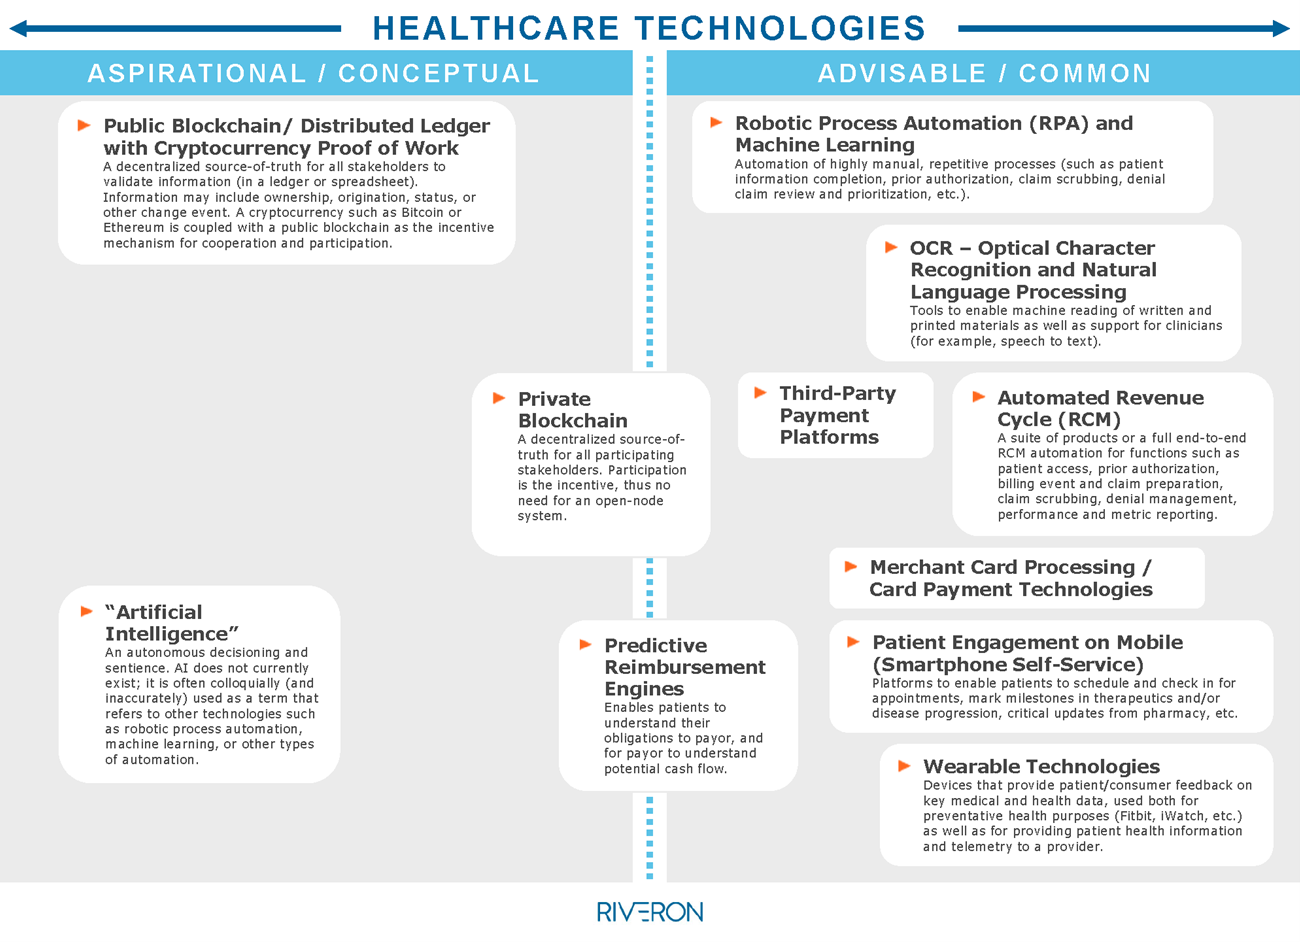 Introducing Innovative Technology for Healthcare Providers 1